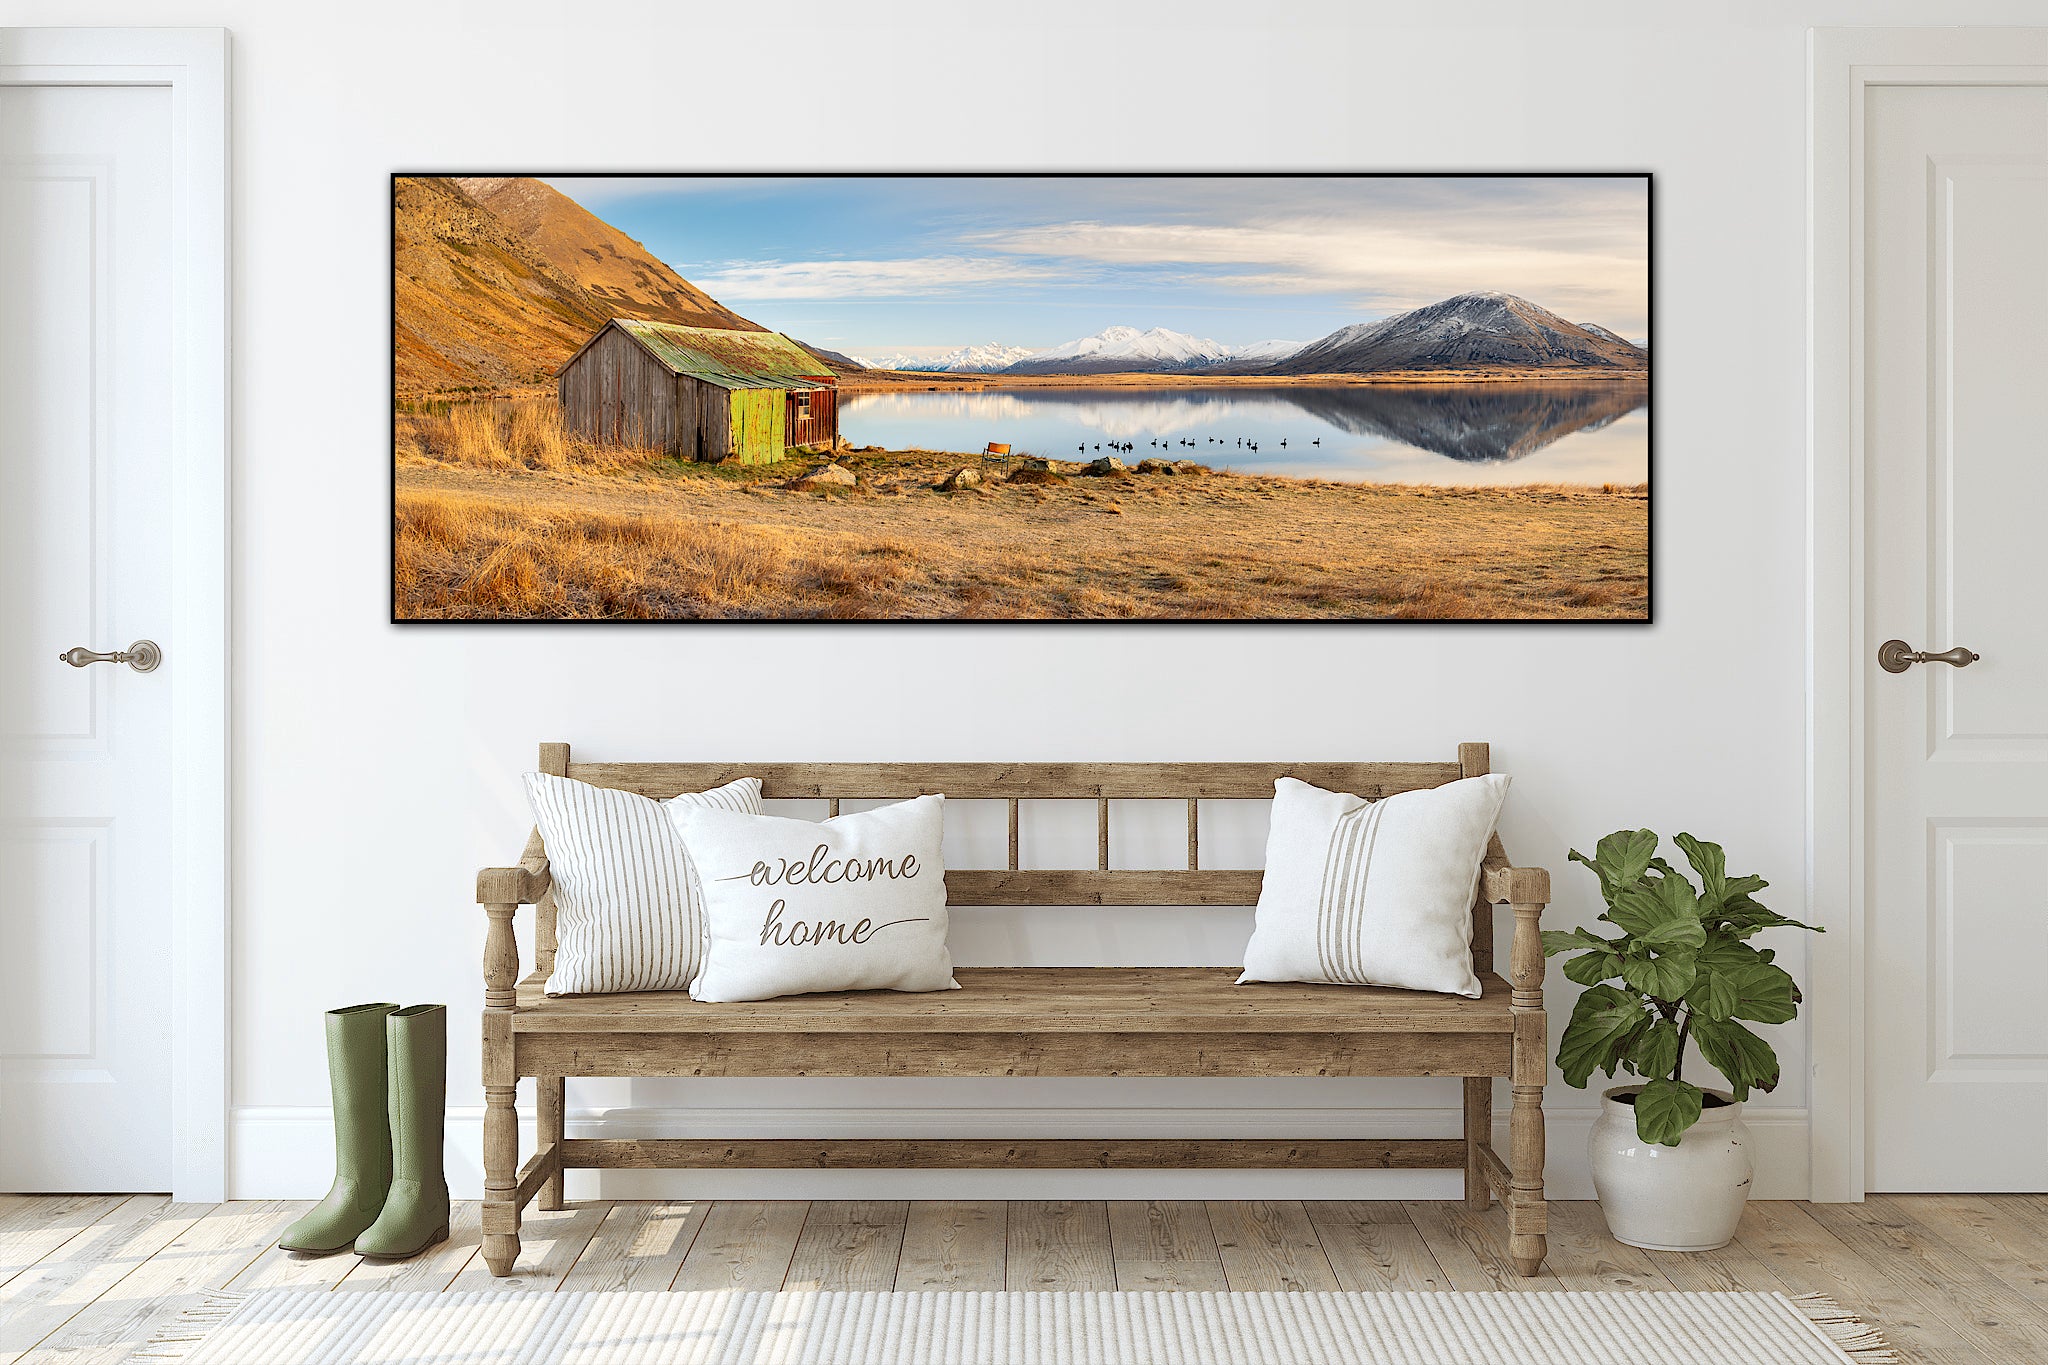 New Zealand Landscape Photography Prints and Art for Sale. Tranquility's Hut- Big Hill and Potts Range by Award Winning New Zealand Landscape Photographer Stephen Milner